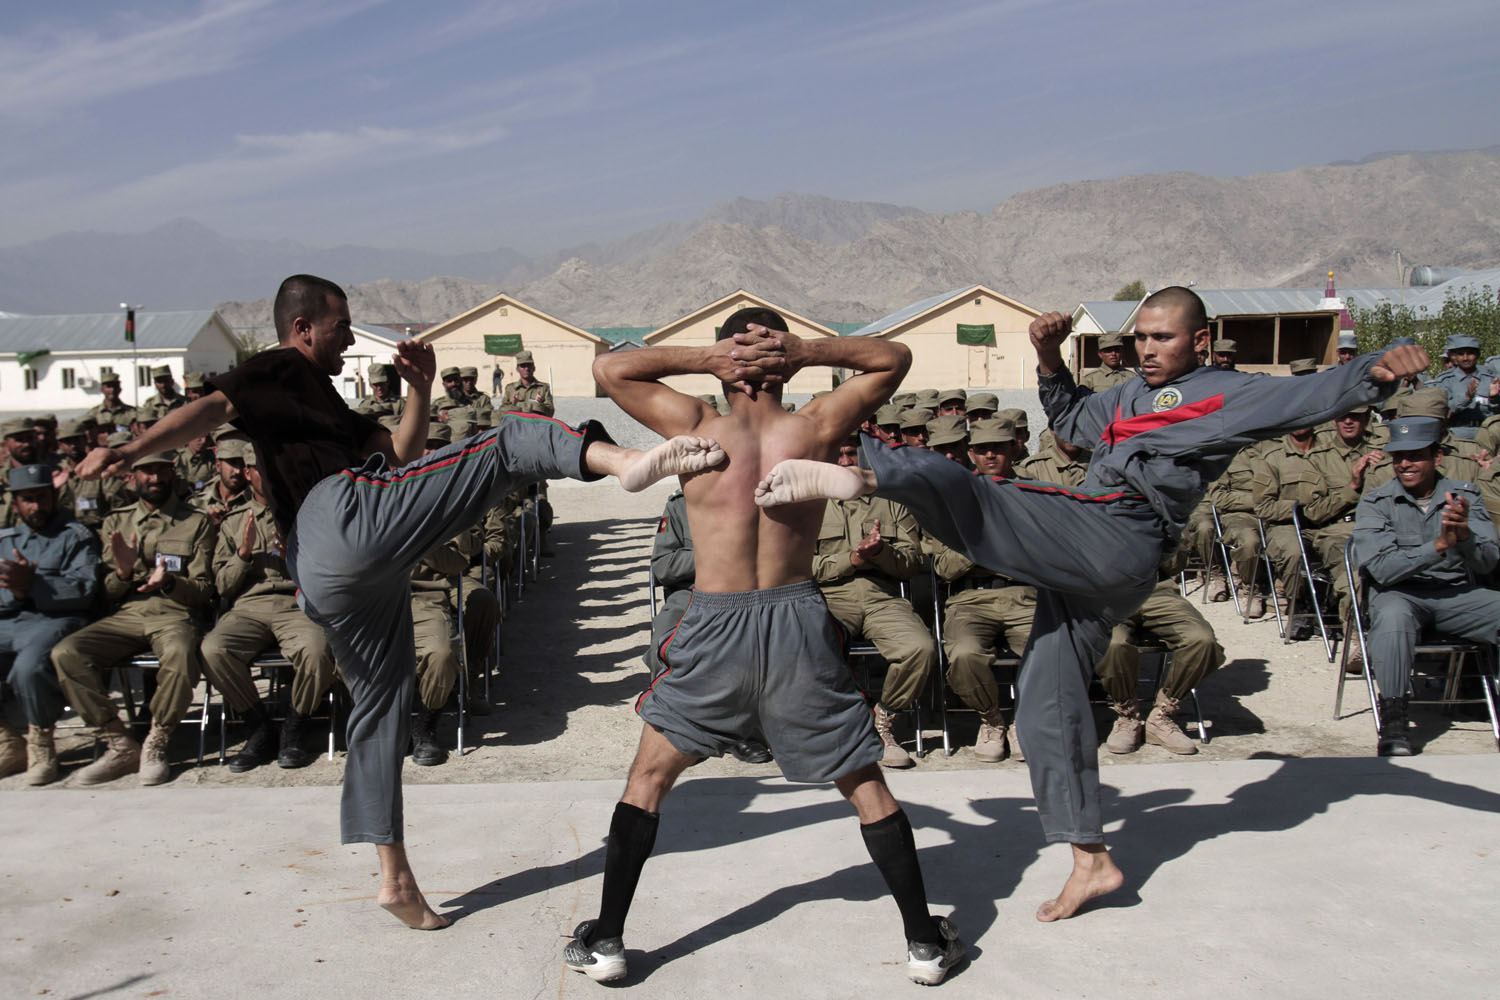 Image: Nov. 7, 2012. Newly graduated Afghan police officers demonstrate their skills during a graduation ceremony at a National Police training center in Laghman province, east of Kabul.